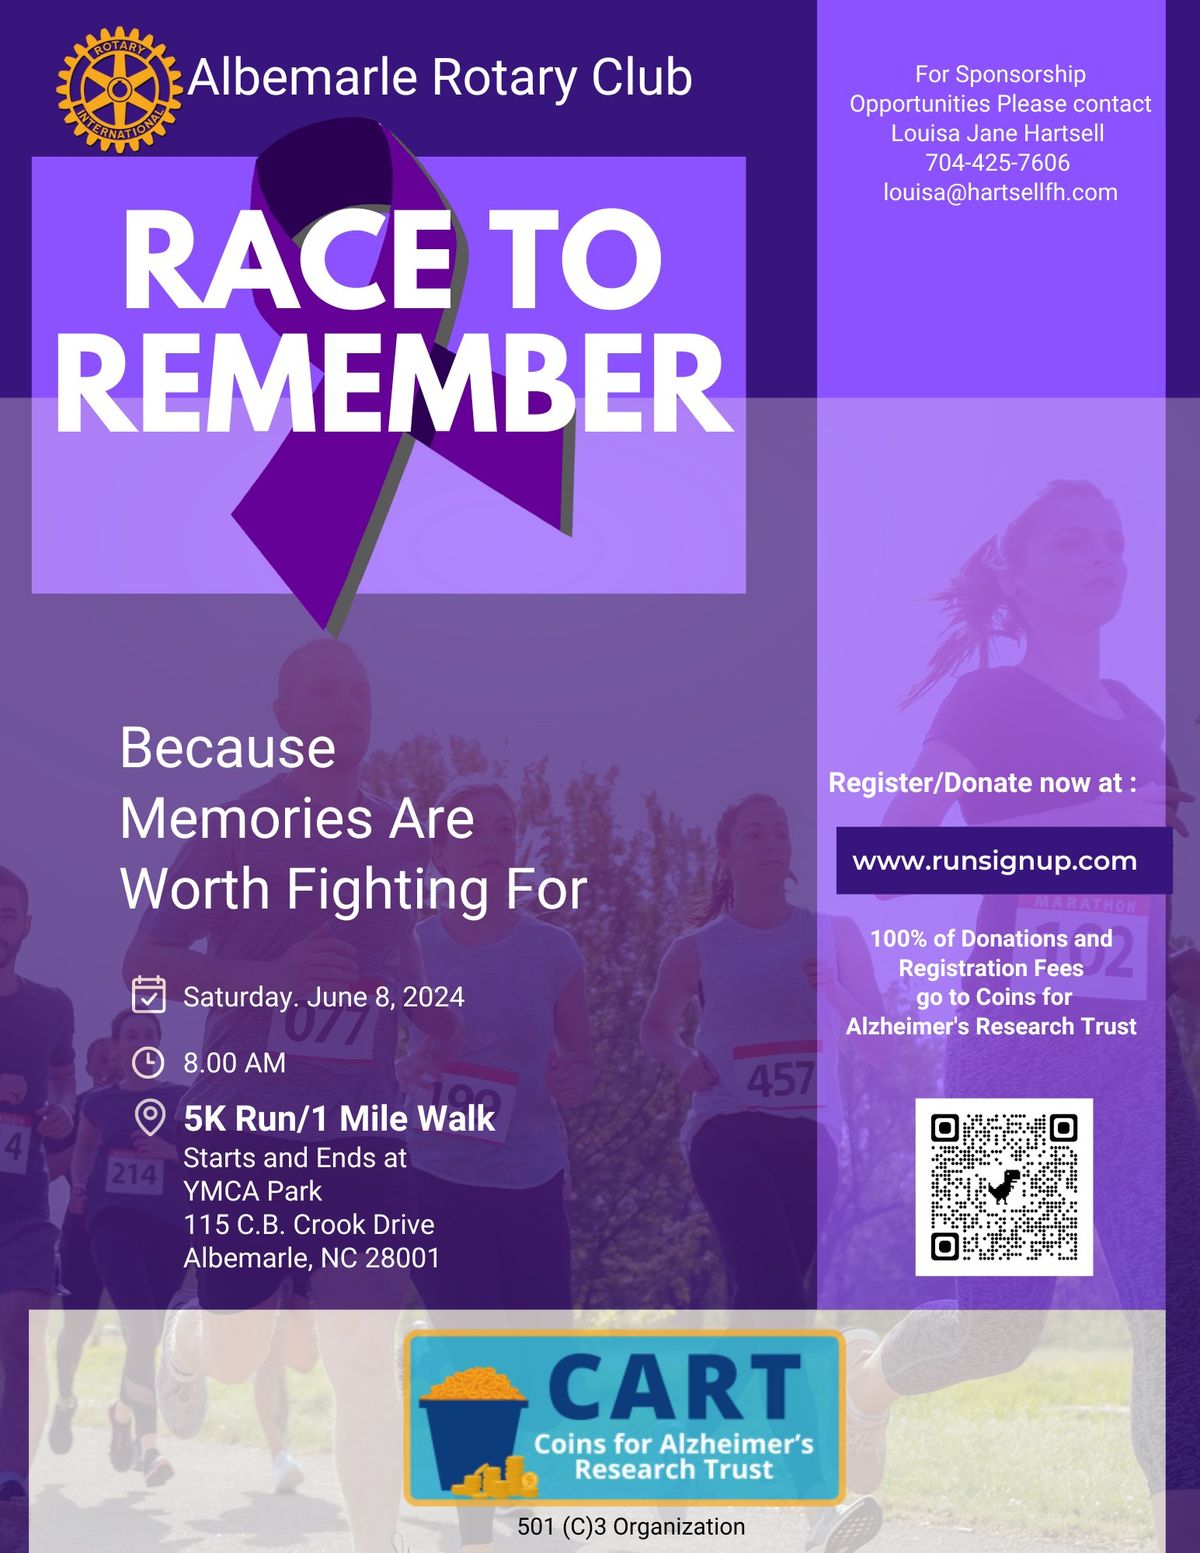 Alzheimer's Charity Race to Remember 5k and 1 Mile Walk presented by Albemarle Rotary Club